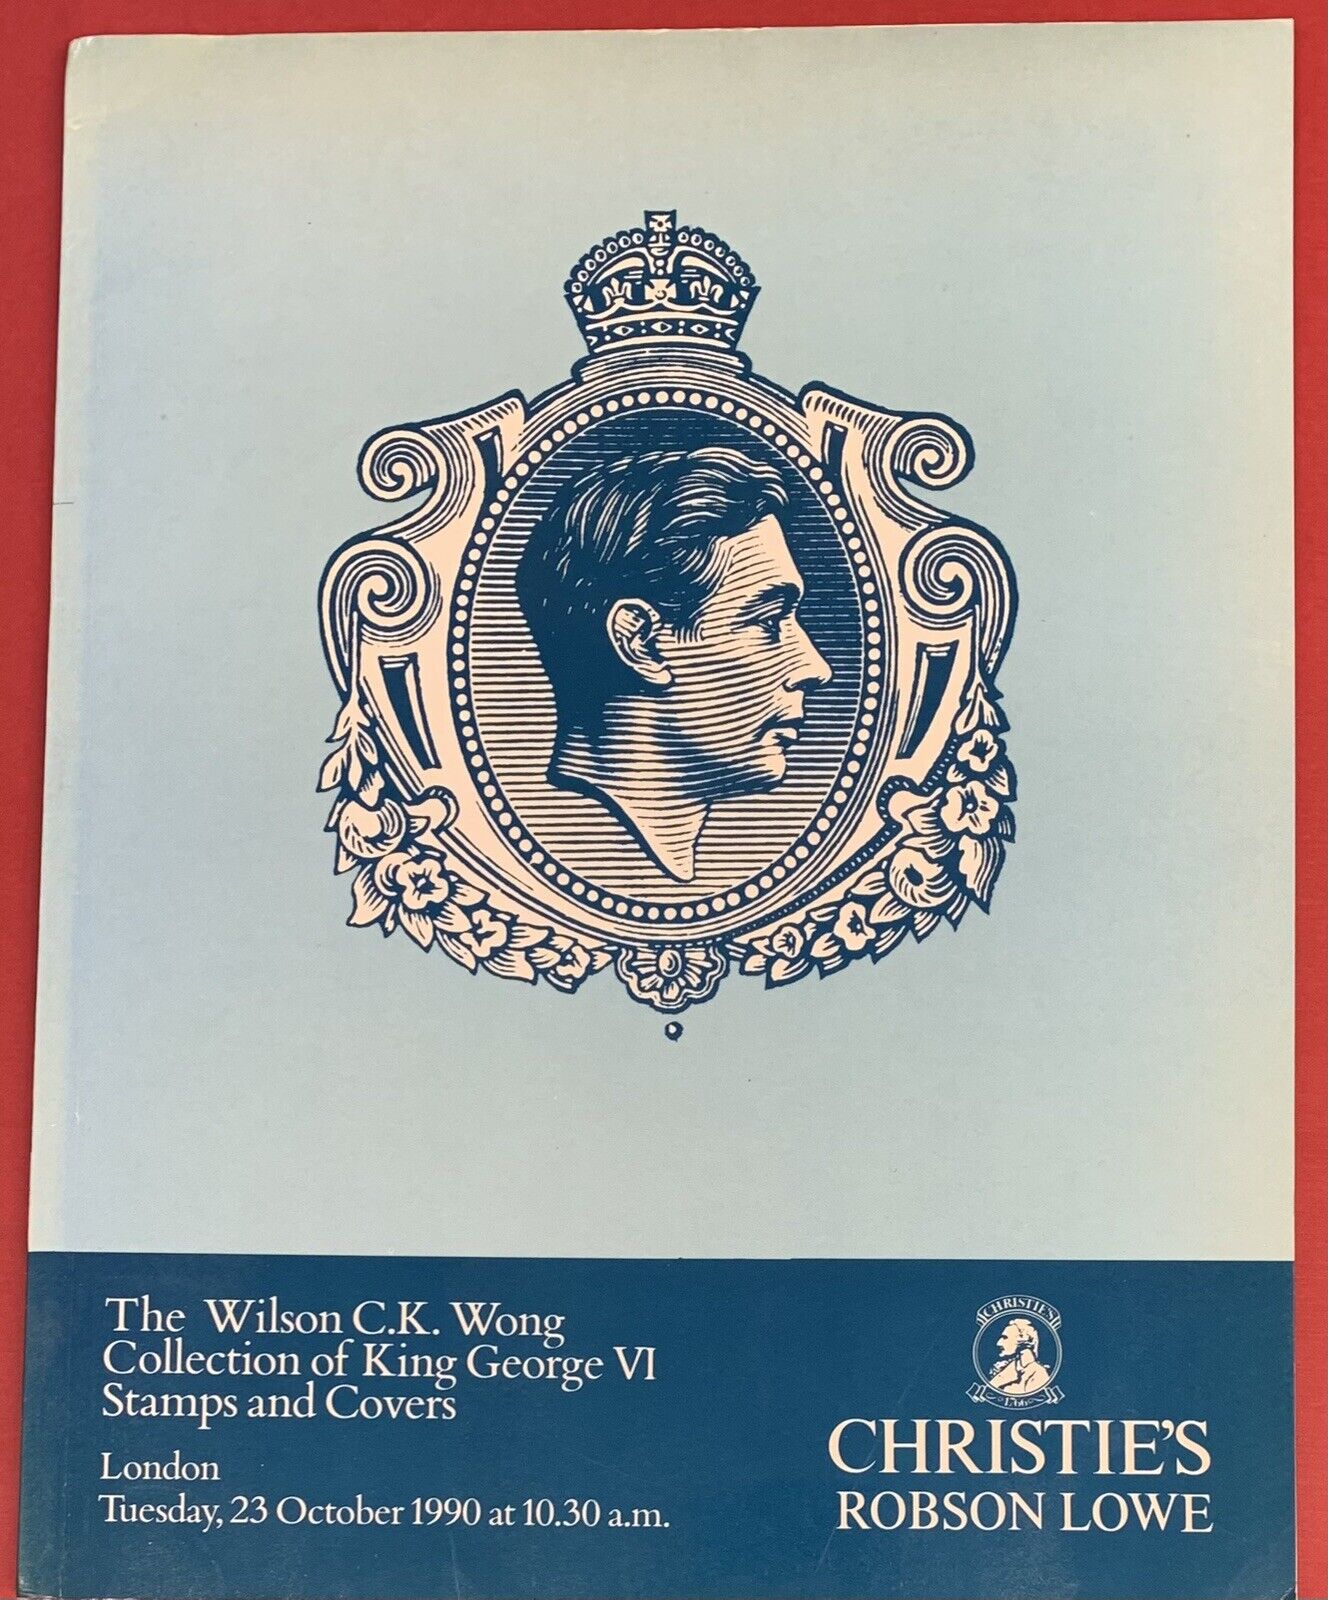 King George VI Stamps and Covers, Christie\'s Robson Lowe, London, Oct. 23, 1990